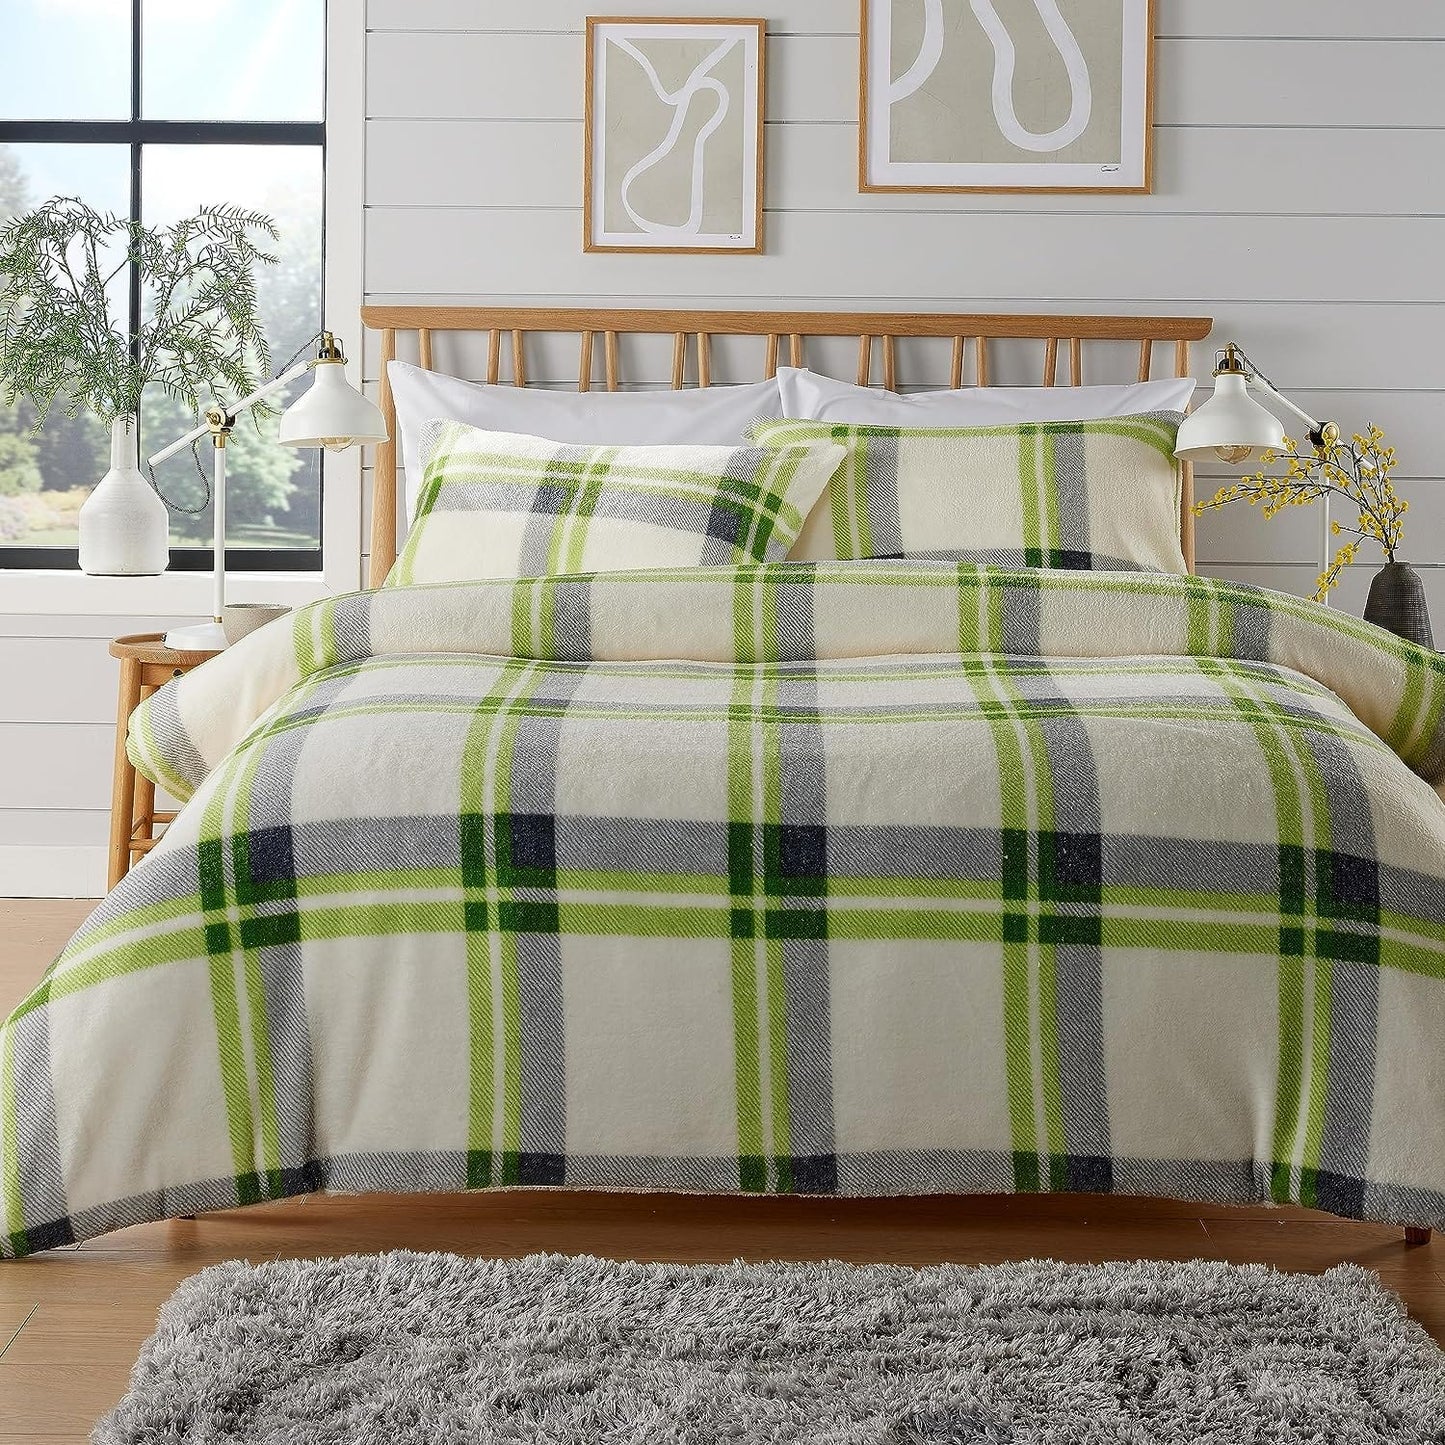 Orkney Check Printed Duvet Sets SINGLE / CHECK GREEN OLIVIA ROCCO Duvet Covers